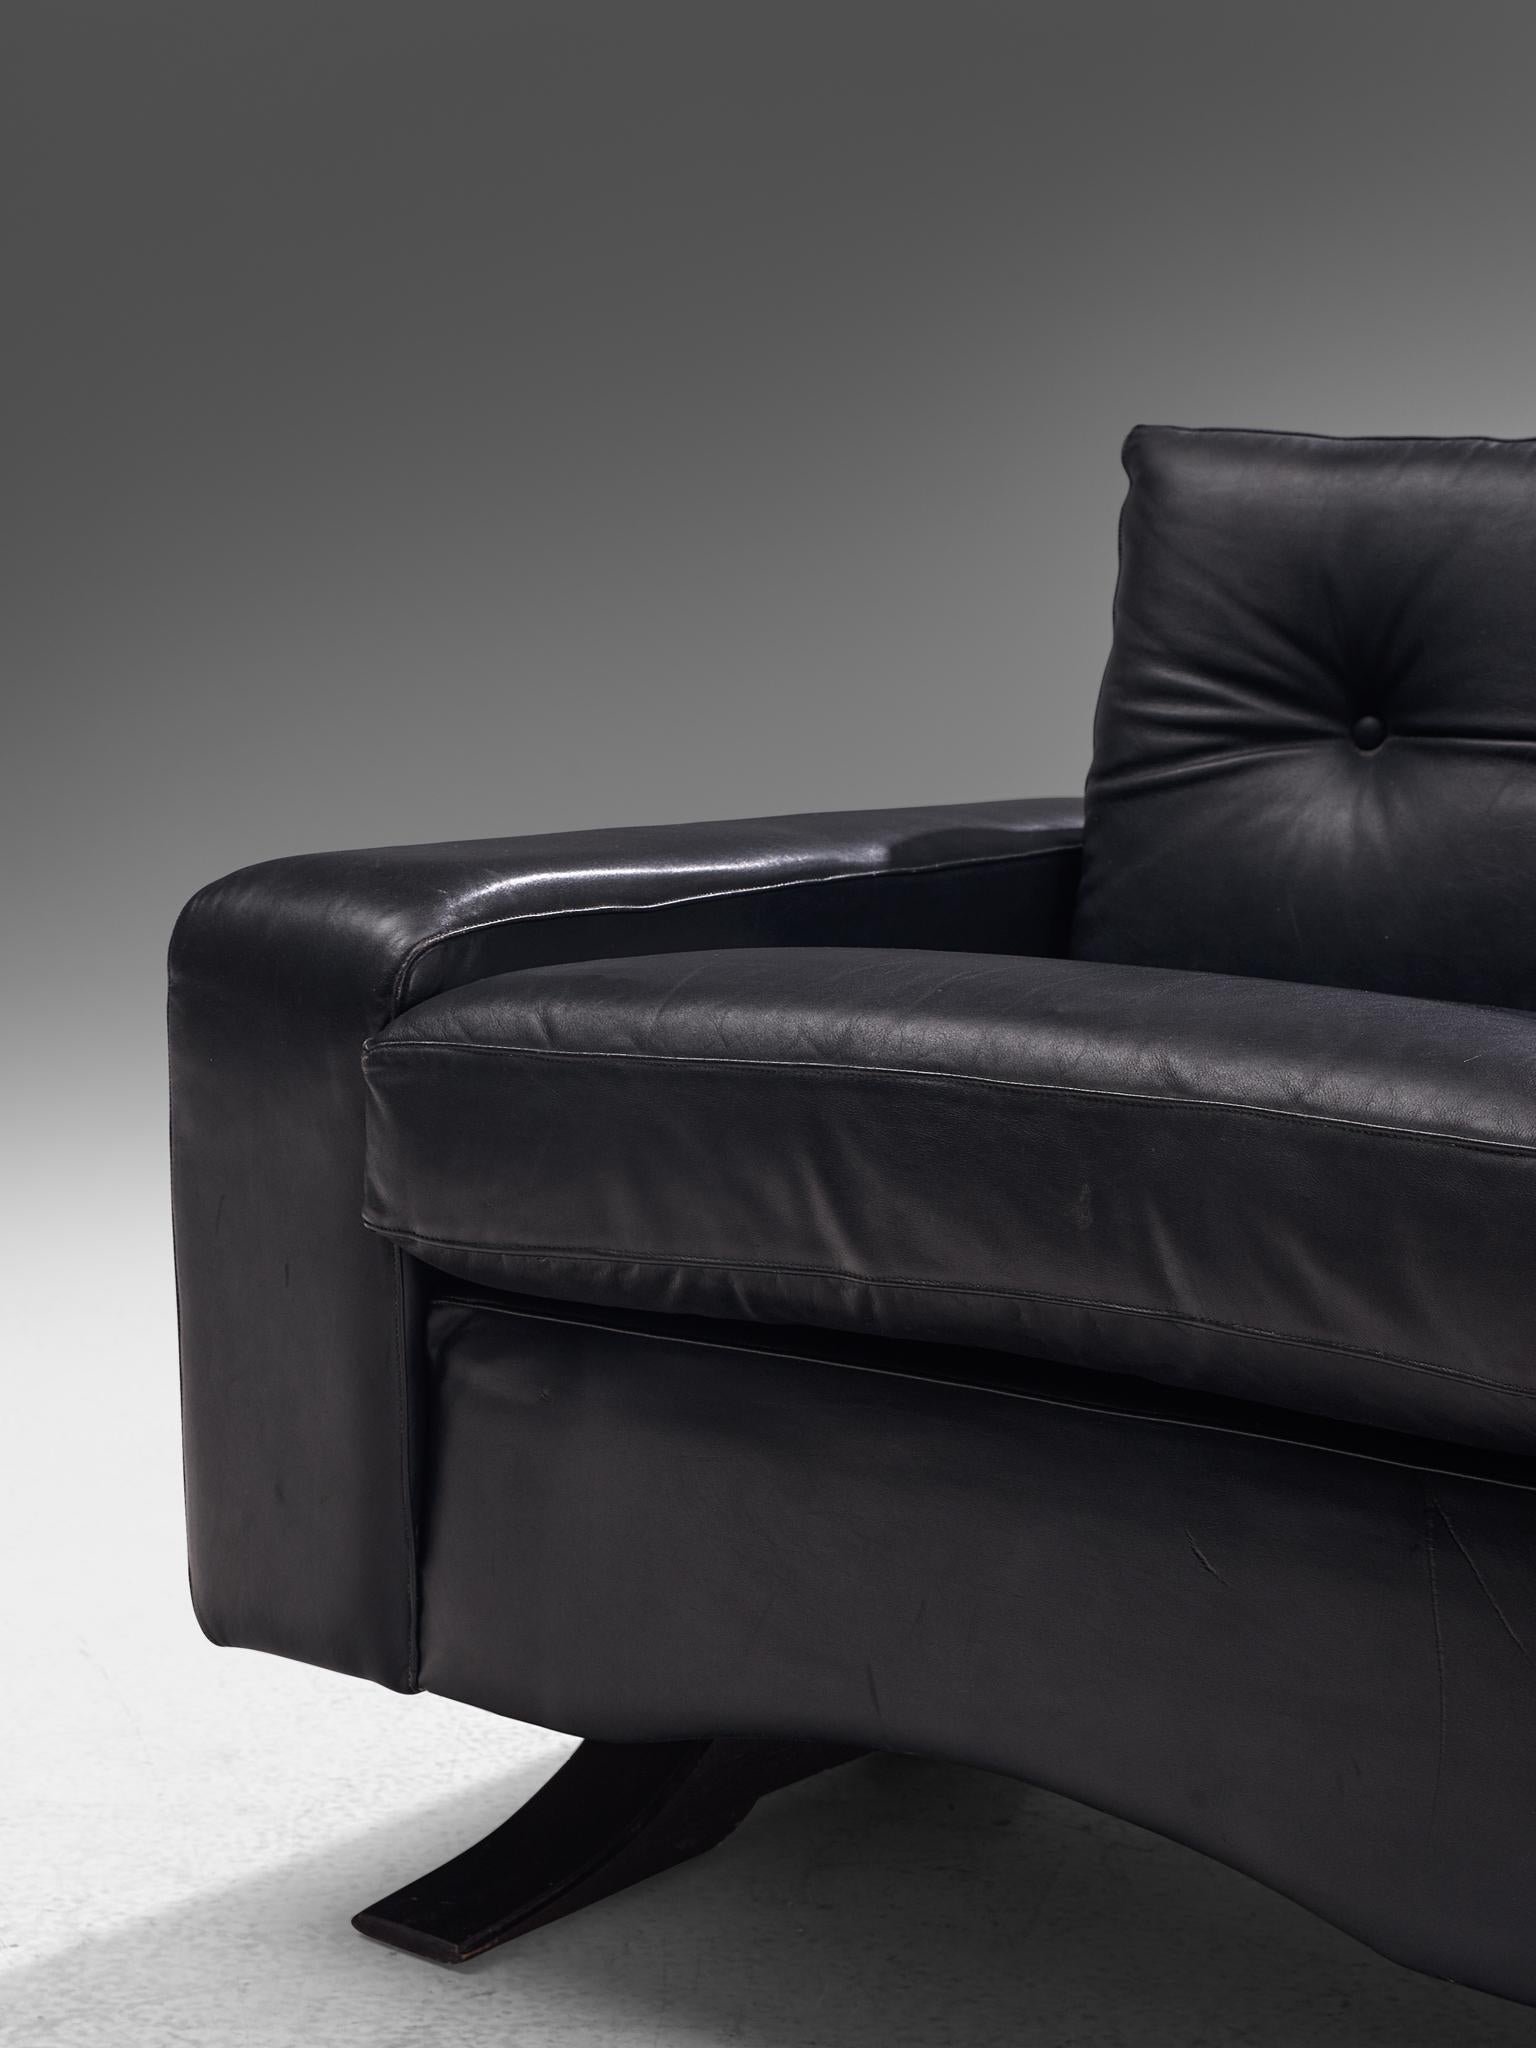 Pair of Armchairs in Black Leather by Franz Sartori for Flexform 1